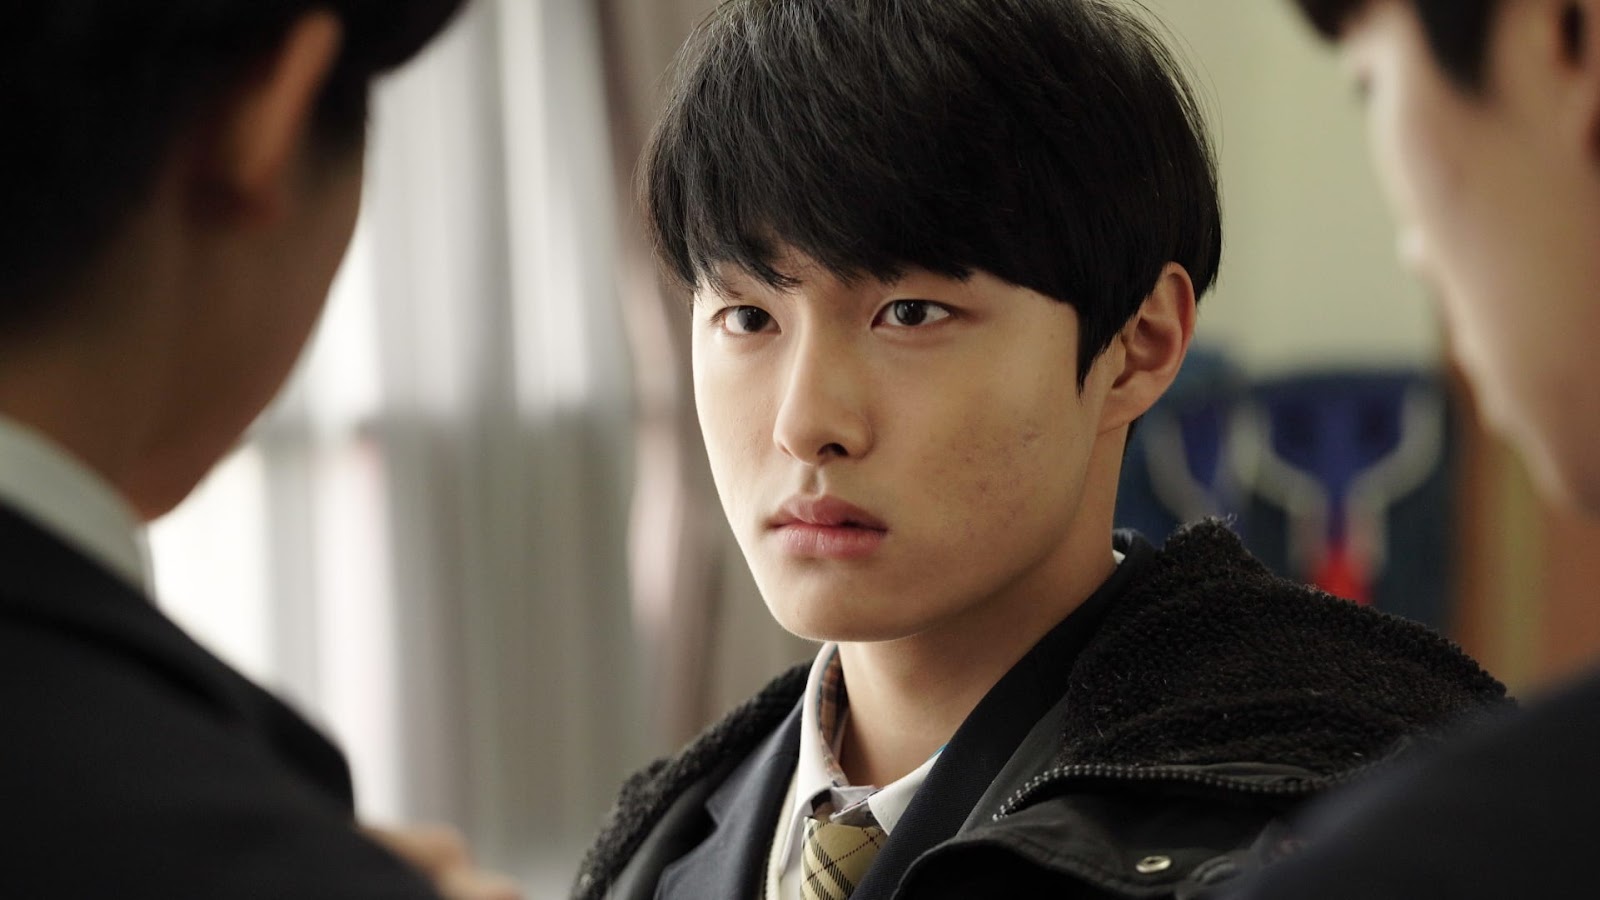 All Of Us Are Dead: Who Is Yoon Chan Young? The Actor Who Plays Lee Cheong San In The Show?